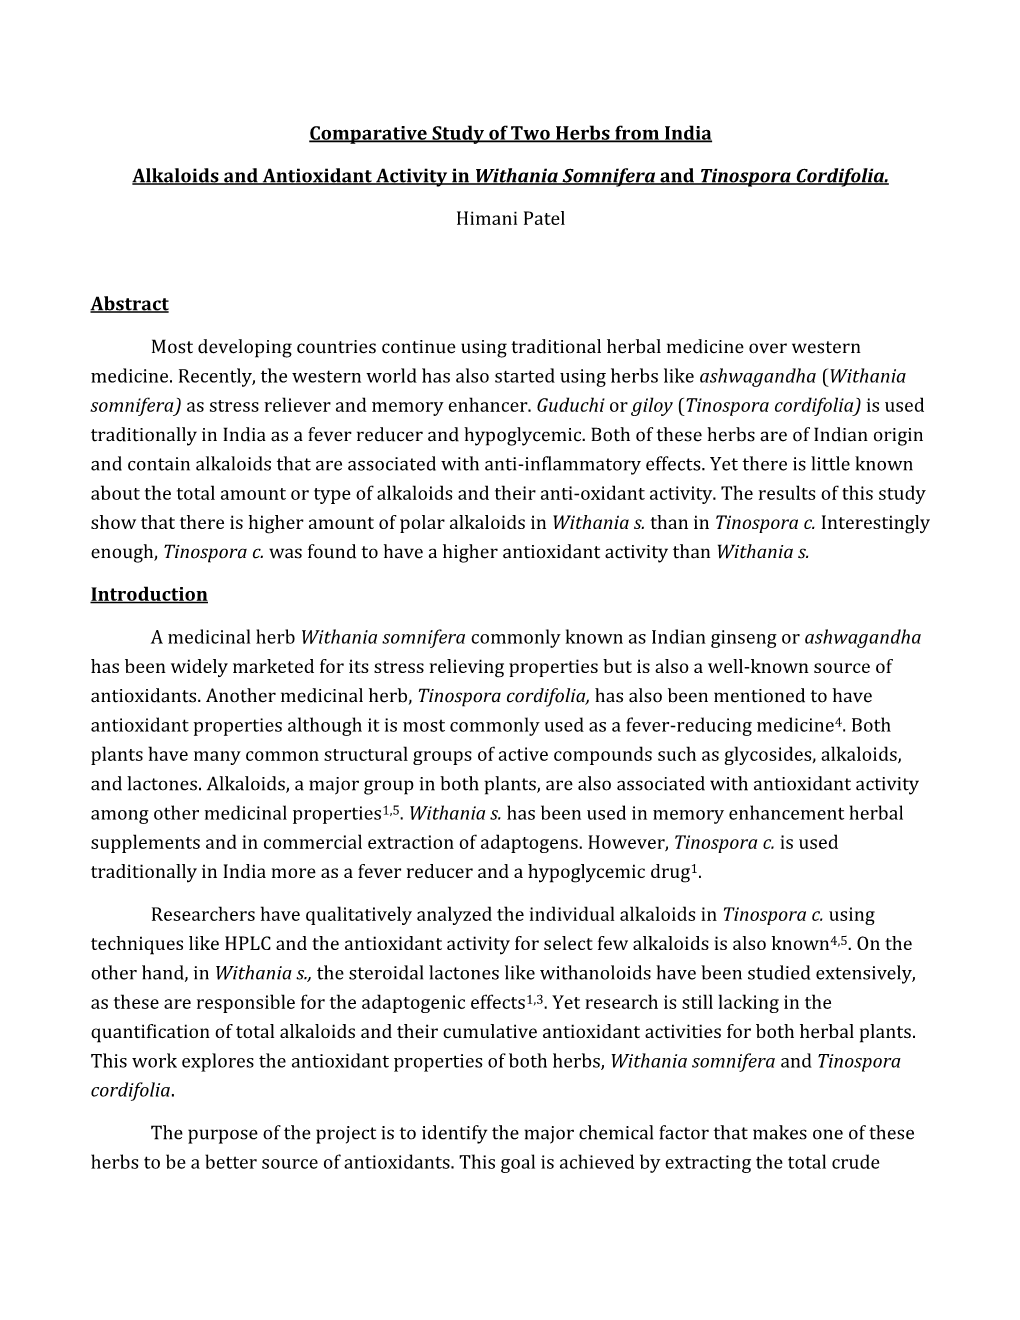 Comparative Study of Two Herbs from India: Alkaloids and Antioxidant Activity in Withania Somnifera and Tinospora Cordifolia